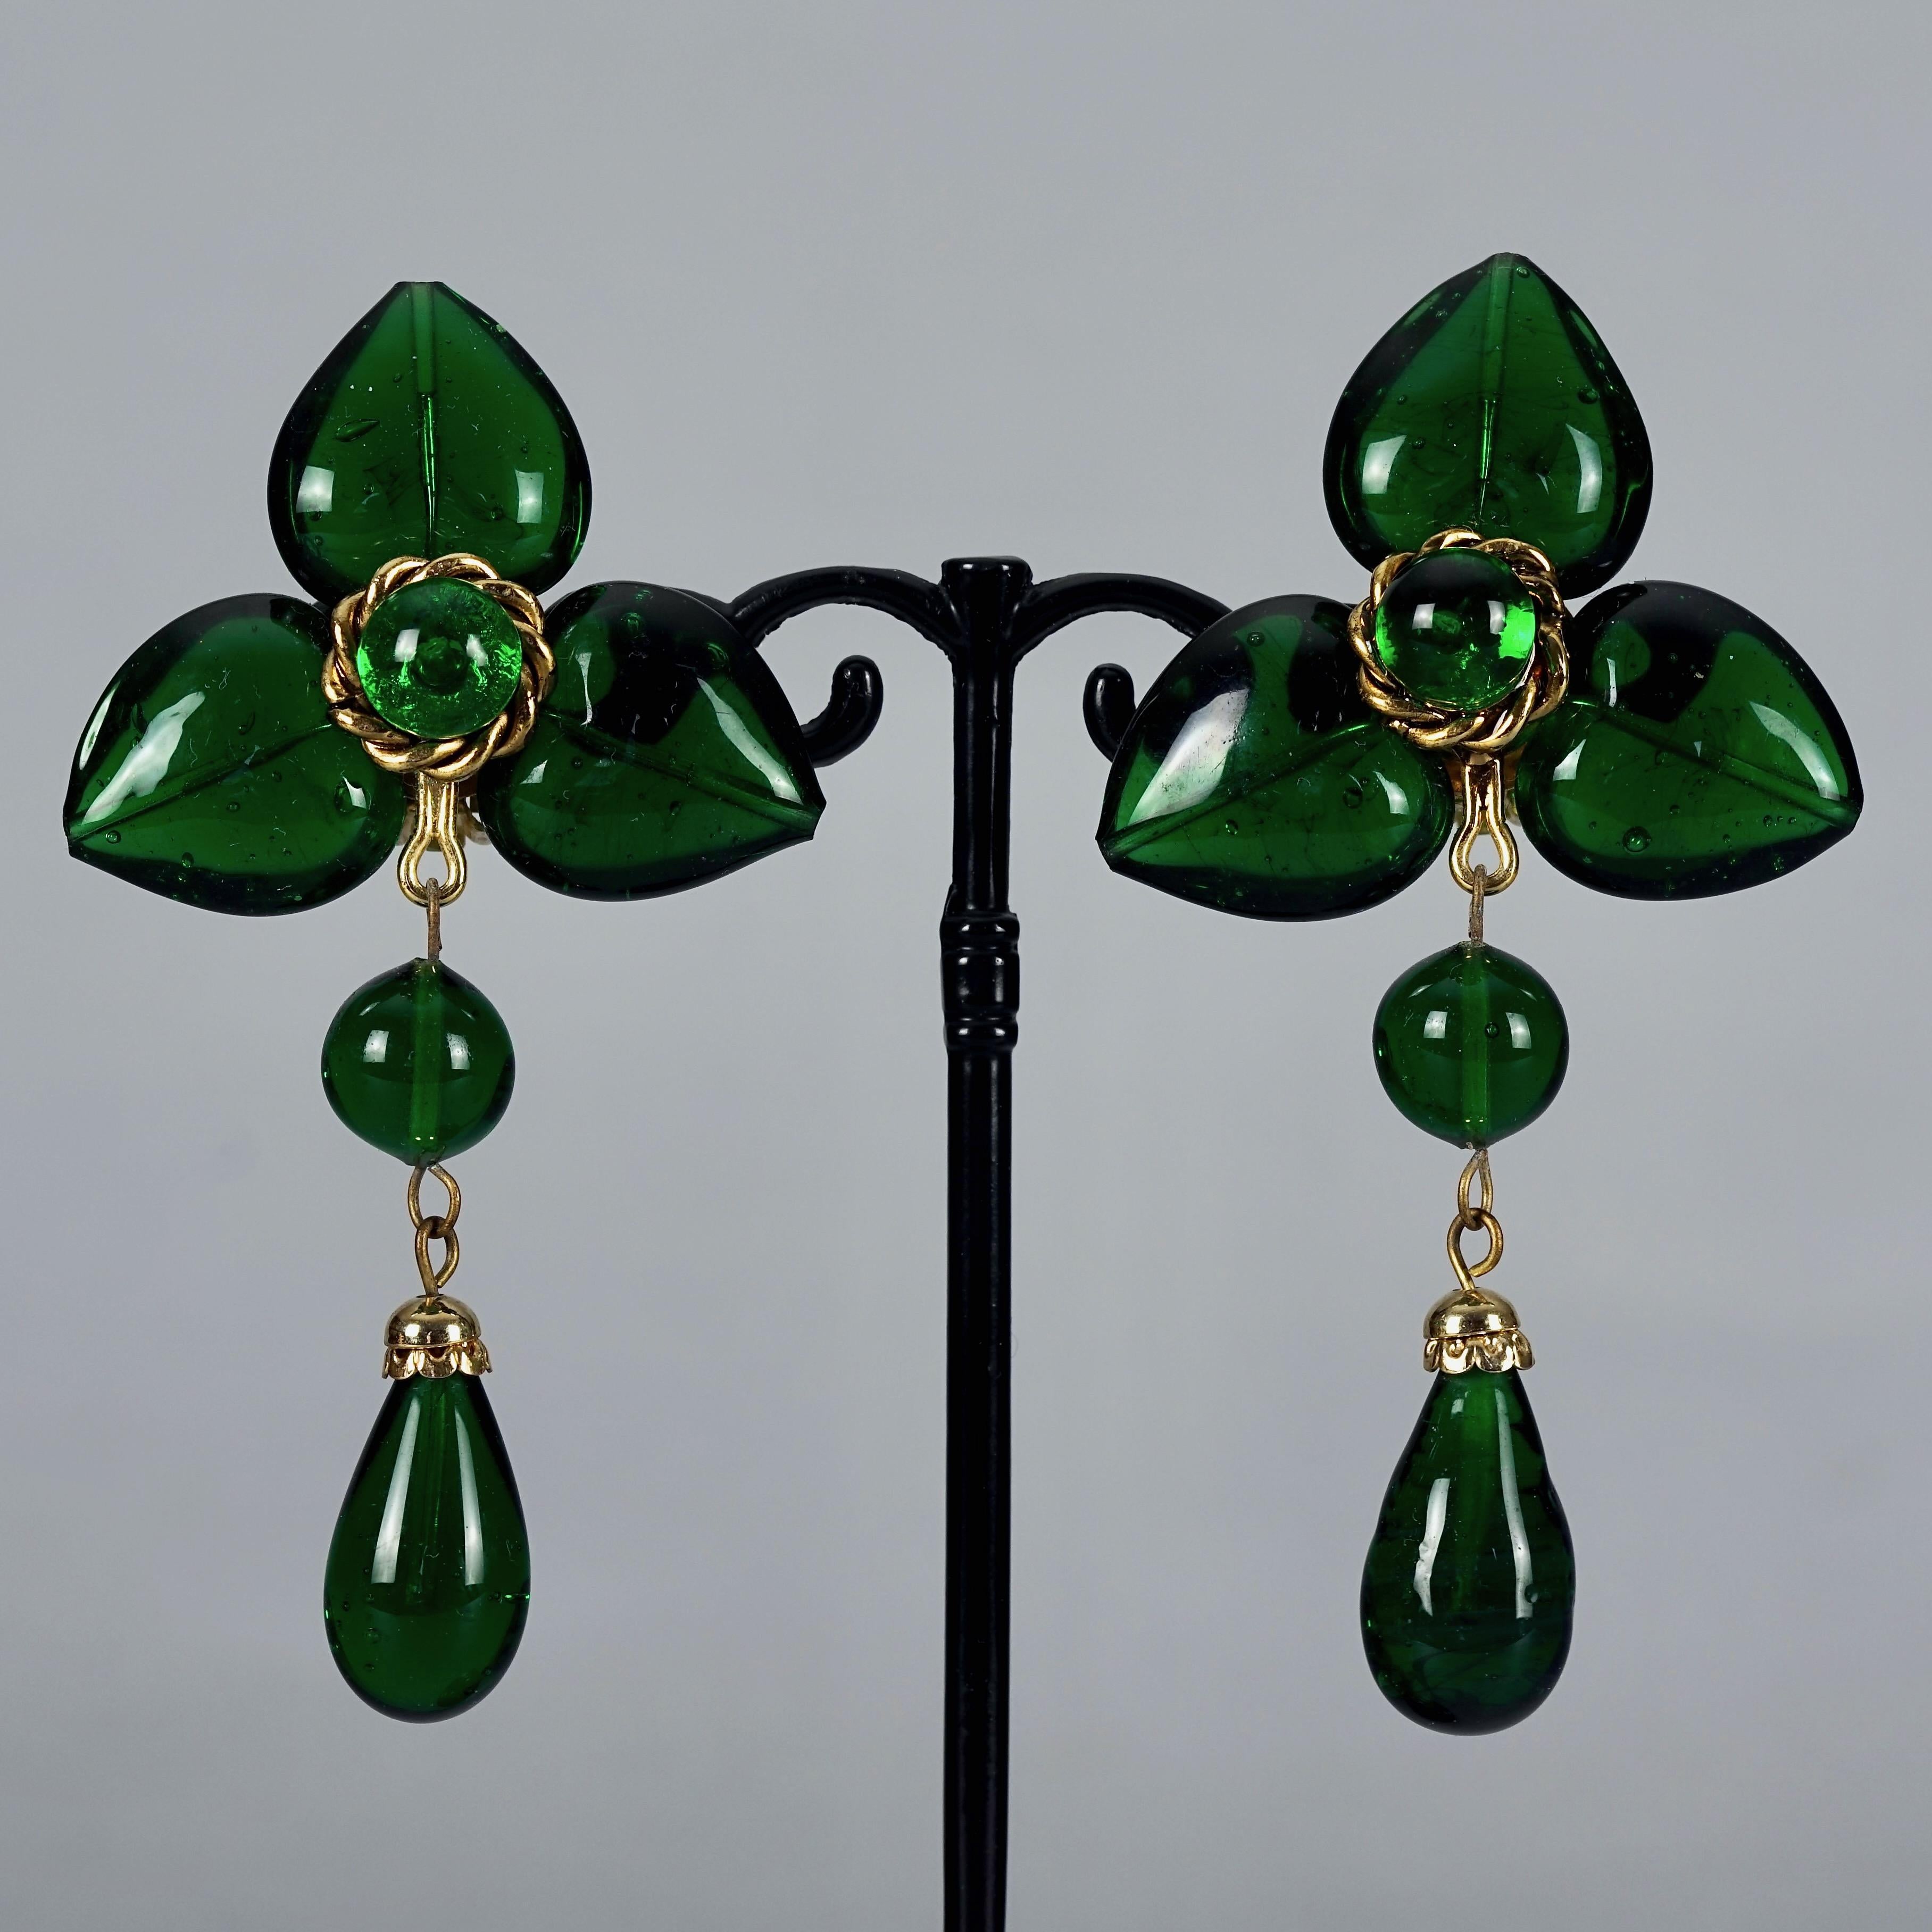 Vintage MOSCHINO Green Glass Heart Dangling Earrings In Excellent Condition For Sale In Kingersheim, Alsace